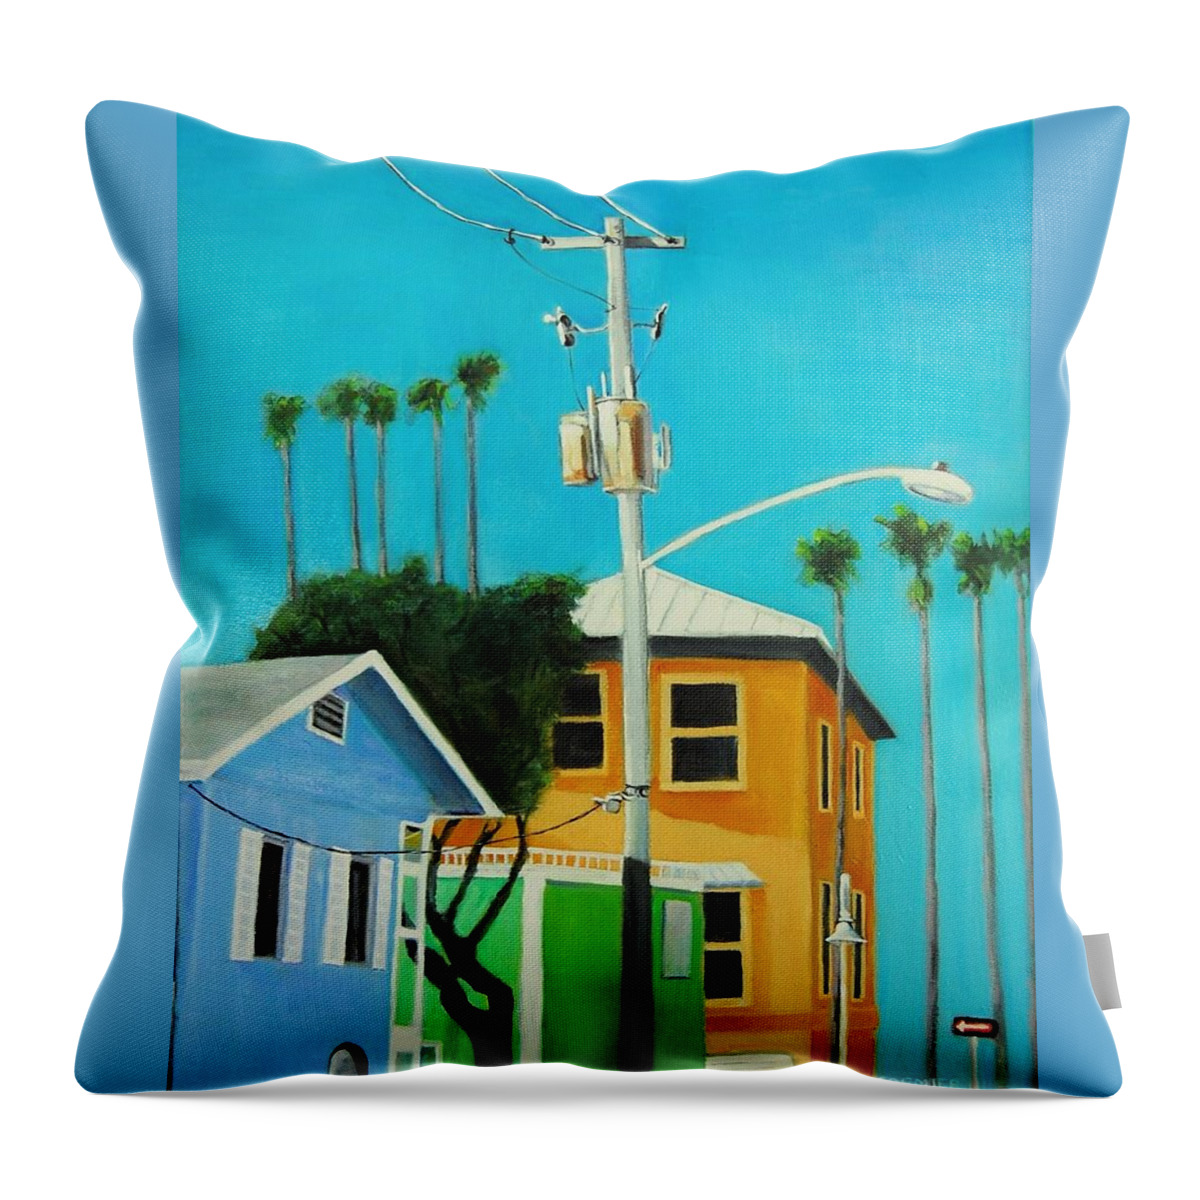 Florida Throw Pillow featuring the painting One Way Street  by Jean Cormier